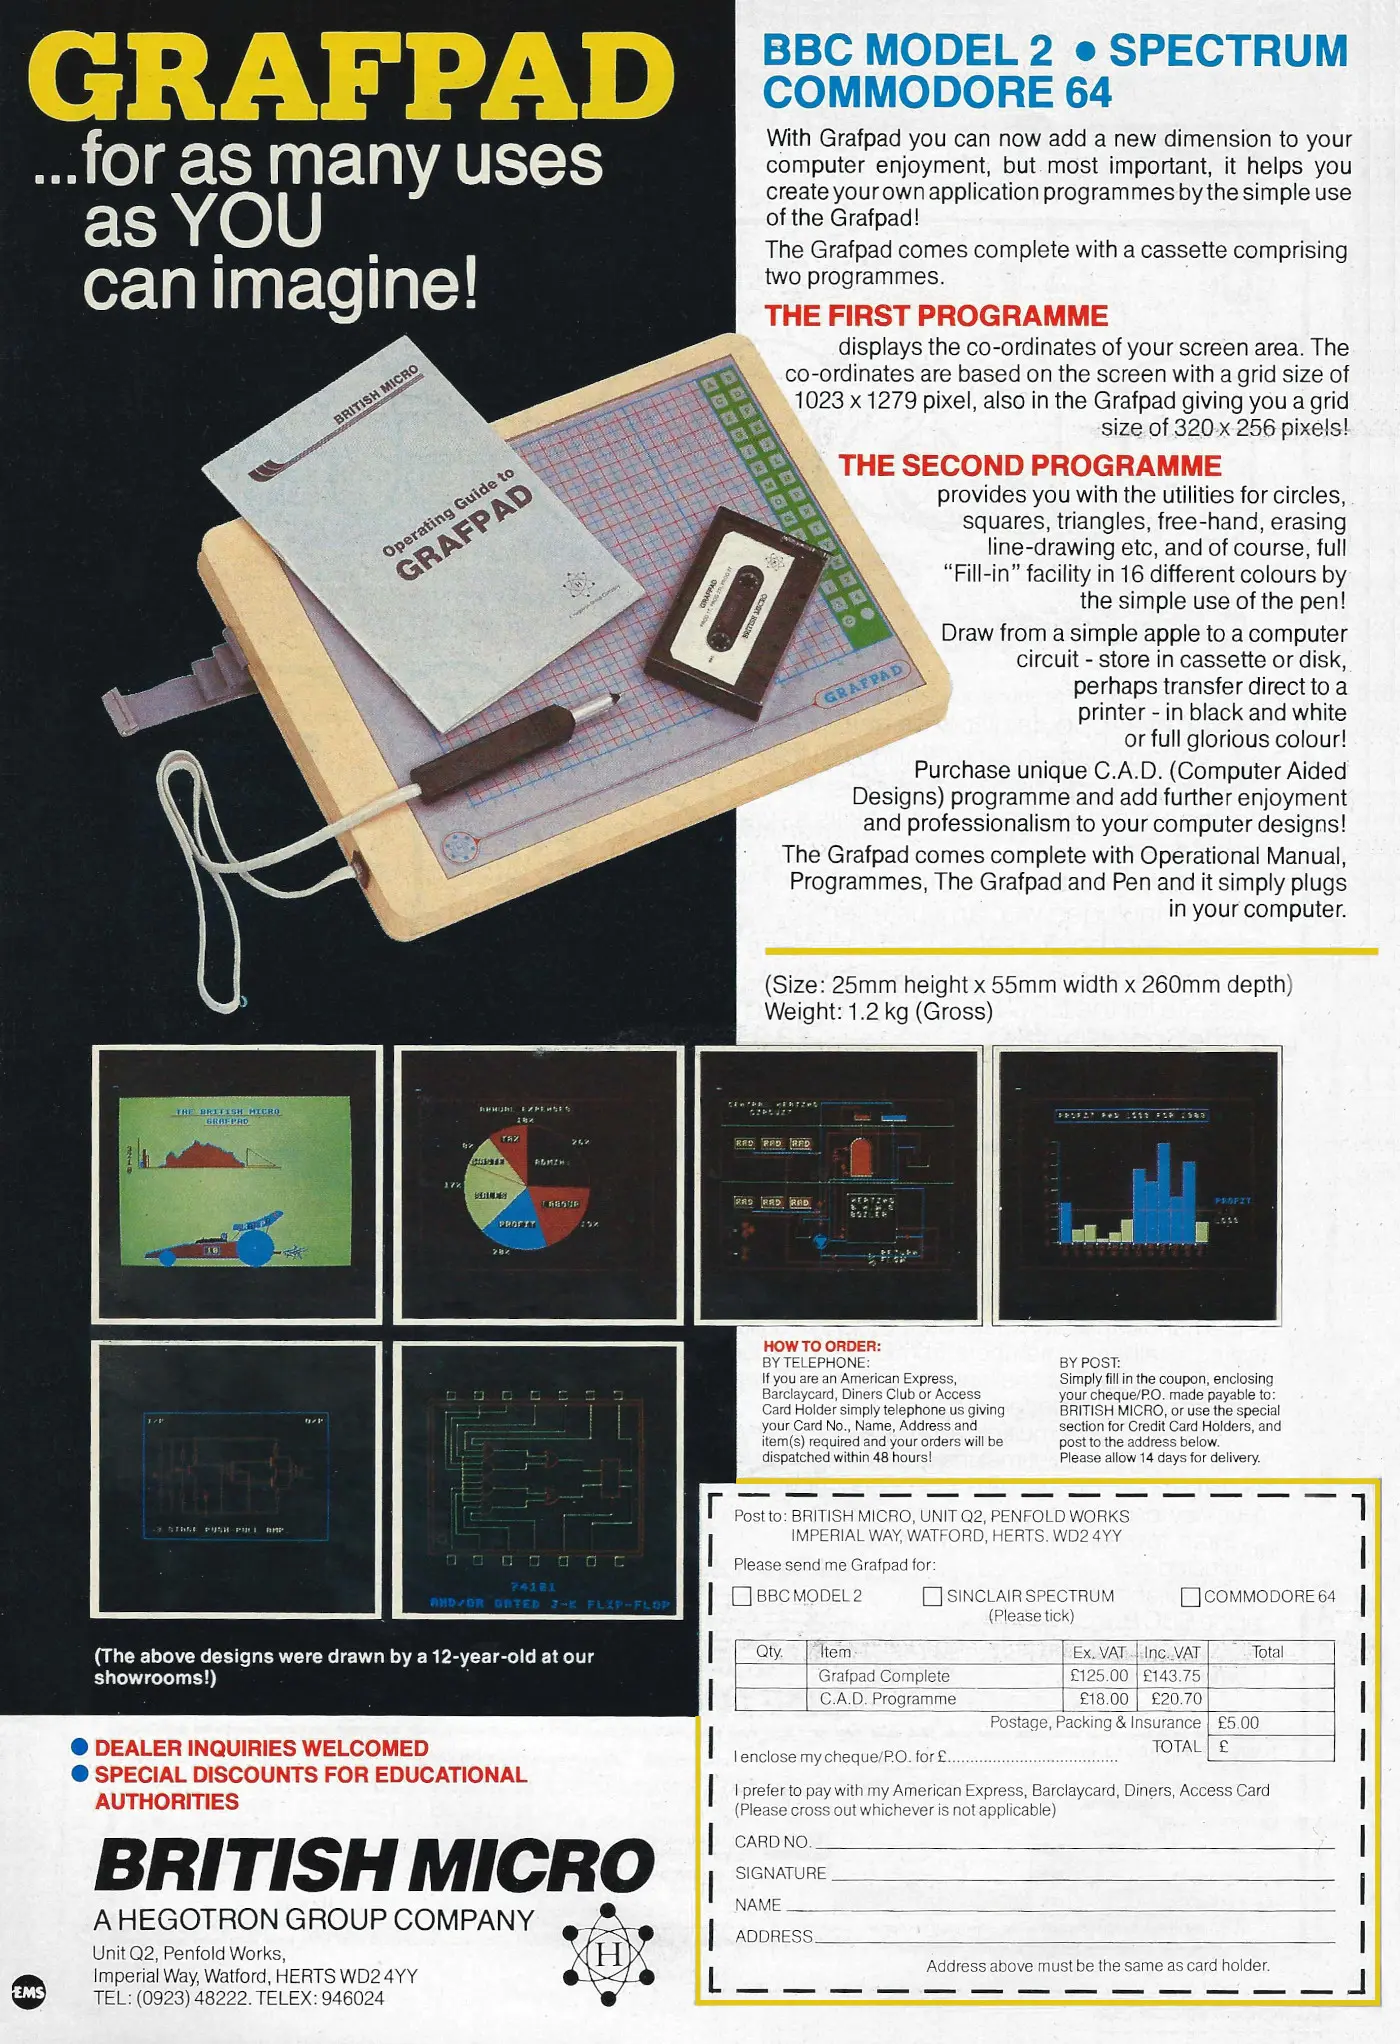 British Micro Advert: Grafpad - for as many uses as YOU can imagine!, from Acorn User, February 1984